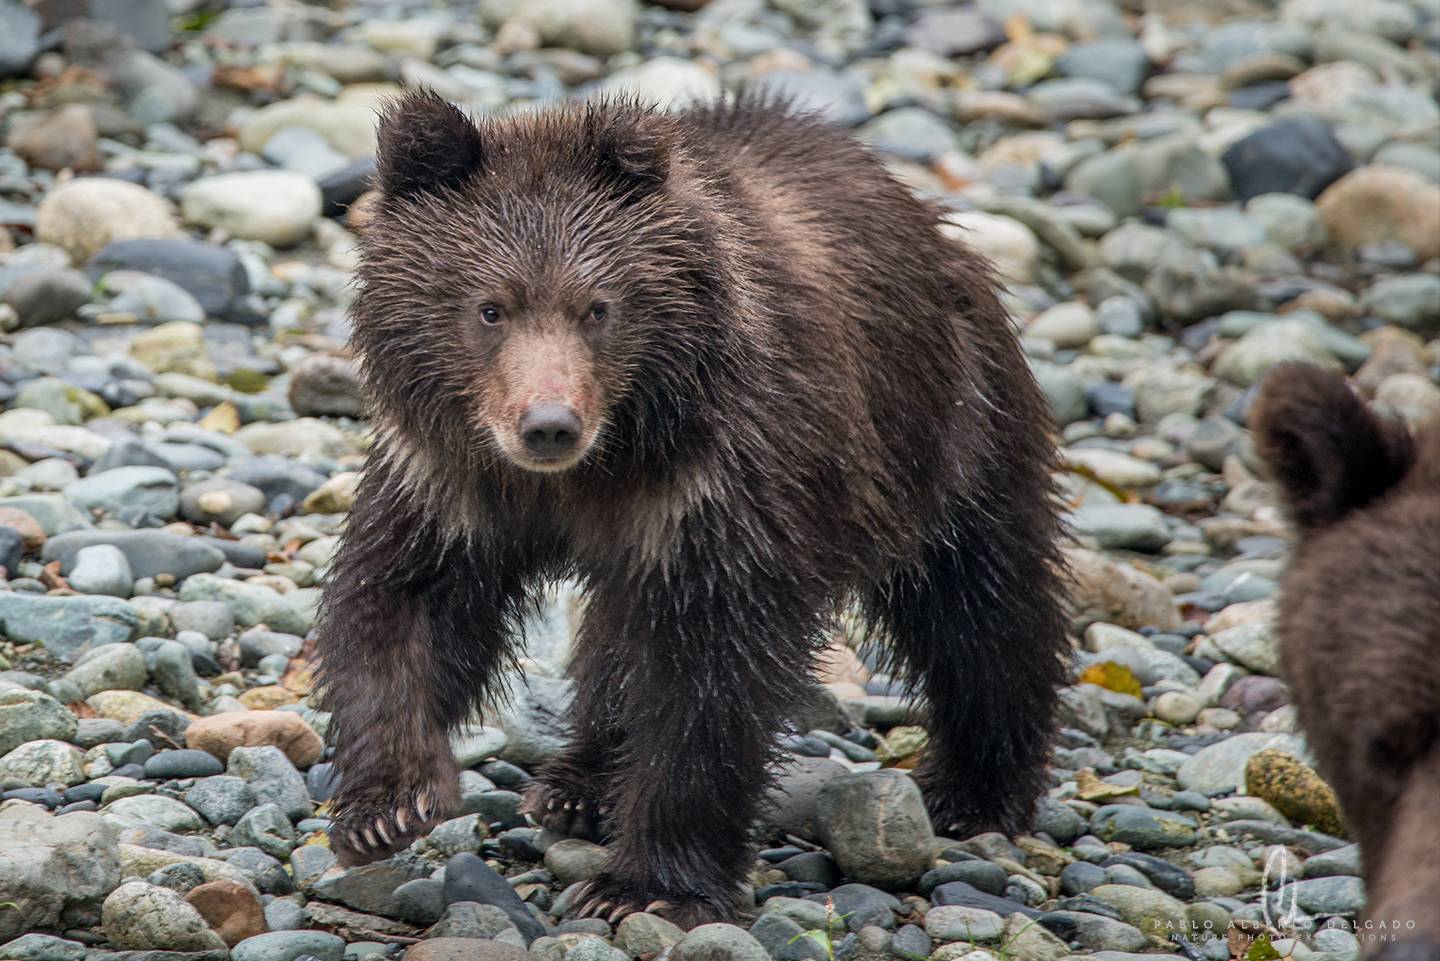 Picture of Grizzly bear cub in Canada